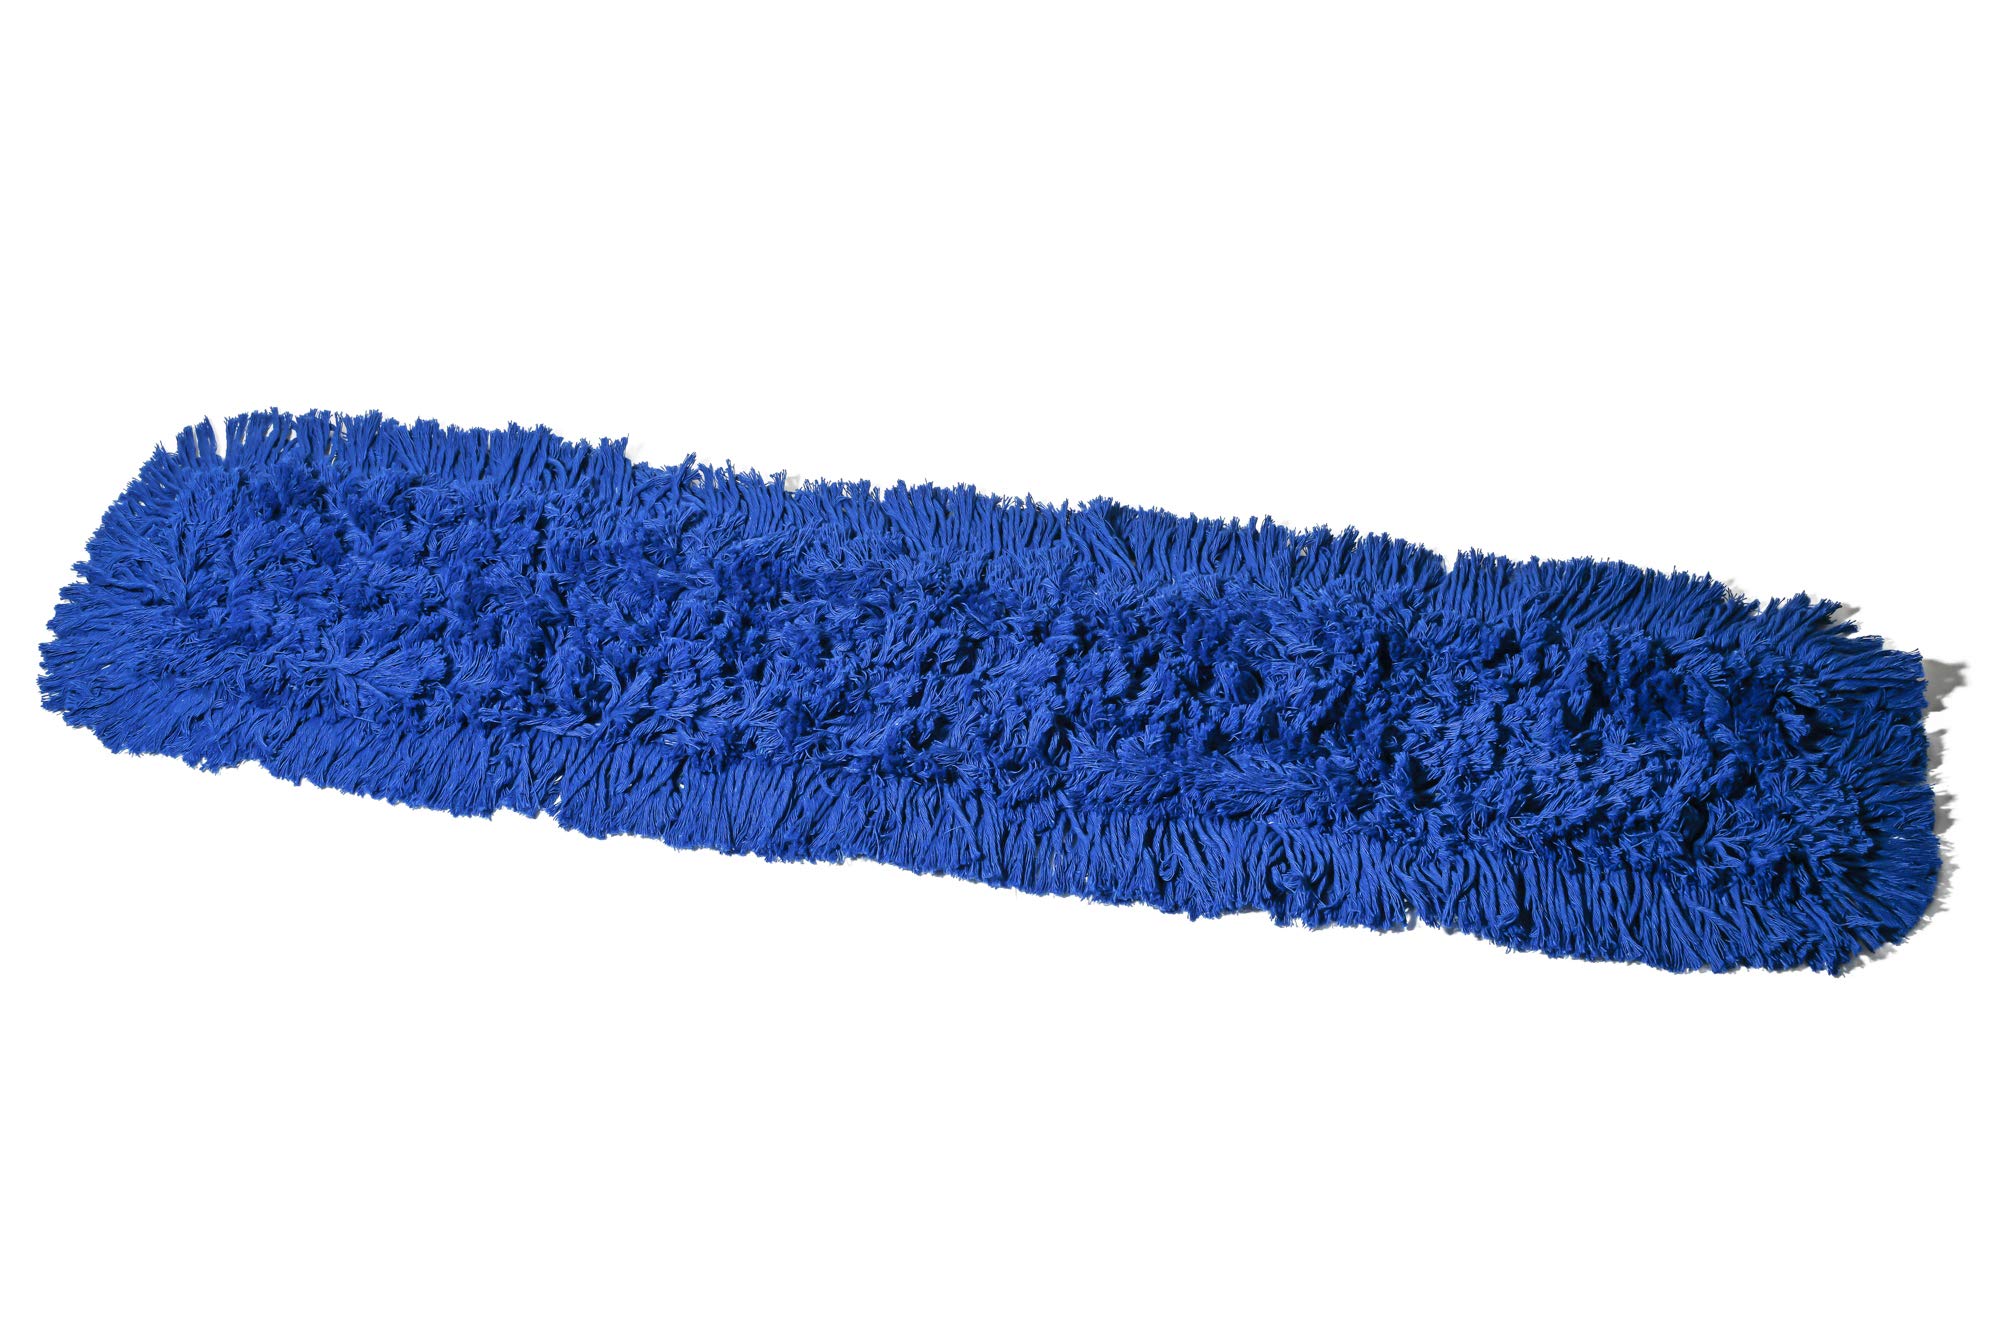 Tidy Tools commercial Dust Mop Replacement Head - 36 x 5 in cotton Nylon Reusable Mop Head - Industrial Dust Mop Refill for Floo